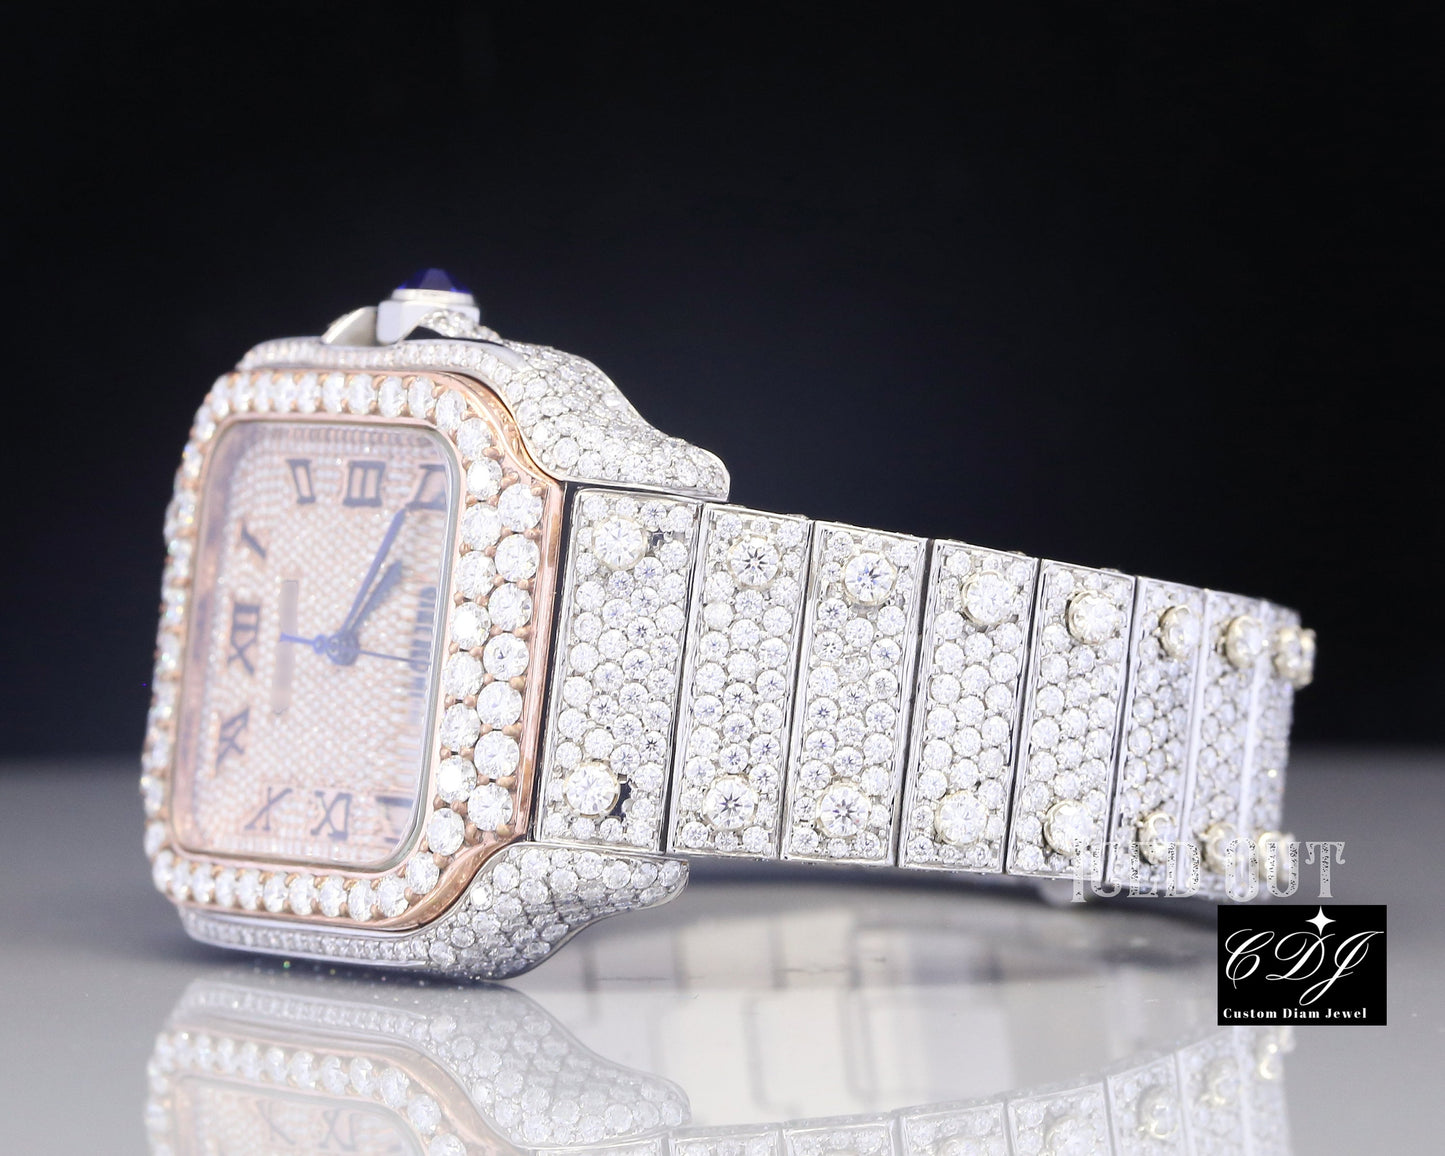 Fully Iced Out White Plated Belt Natural Diamond Watch Luxury Bust Down Waterproof Watches Hip Hop Handmade Stainless Steel Watch